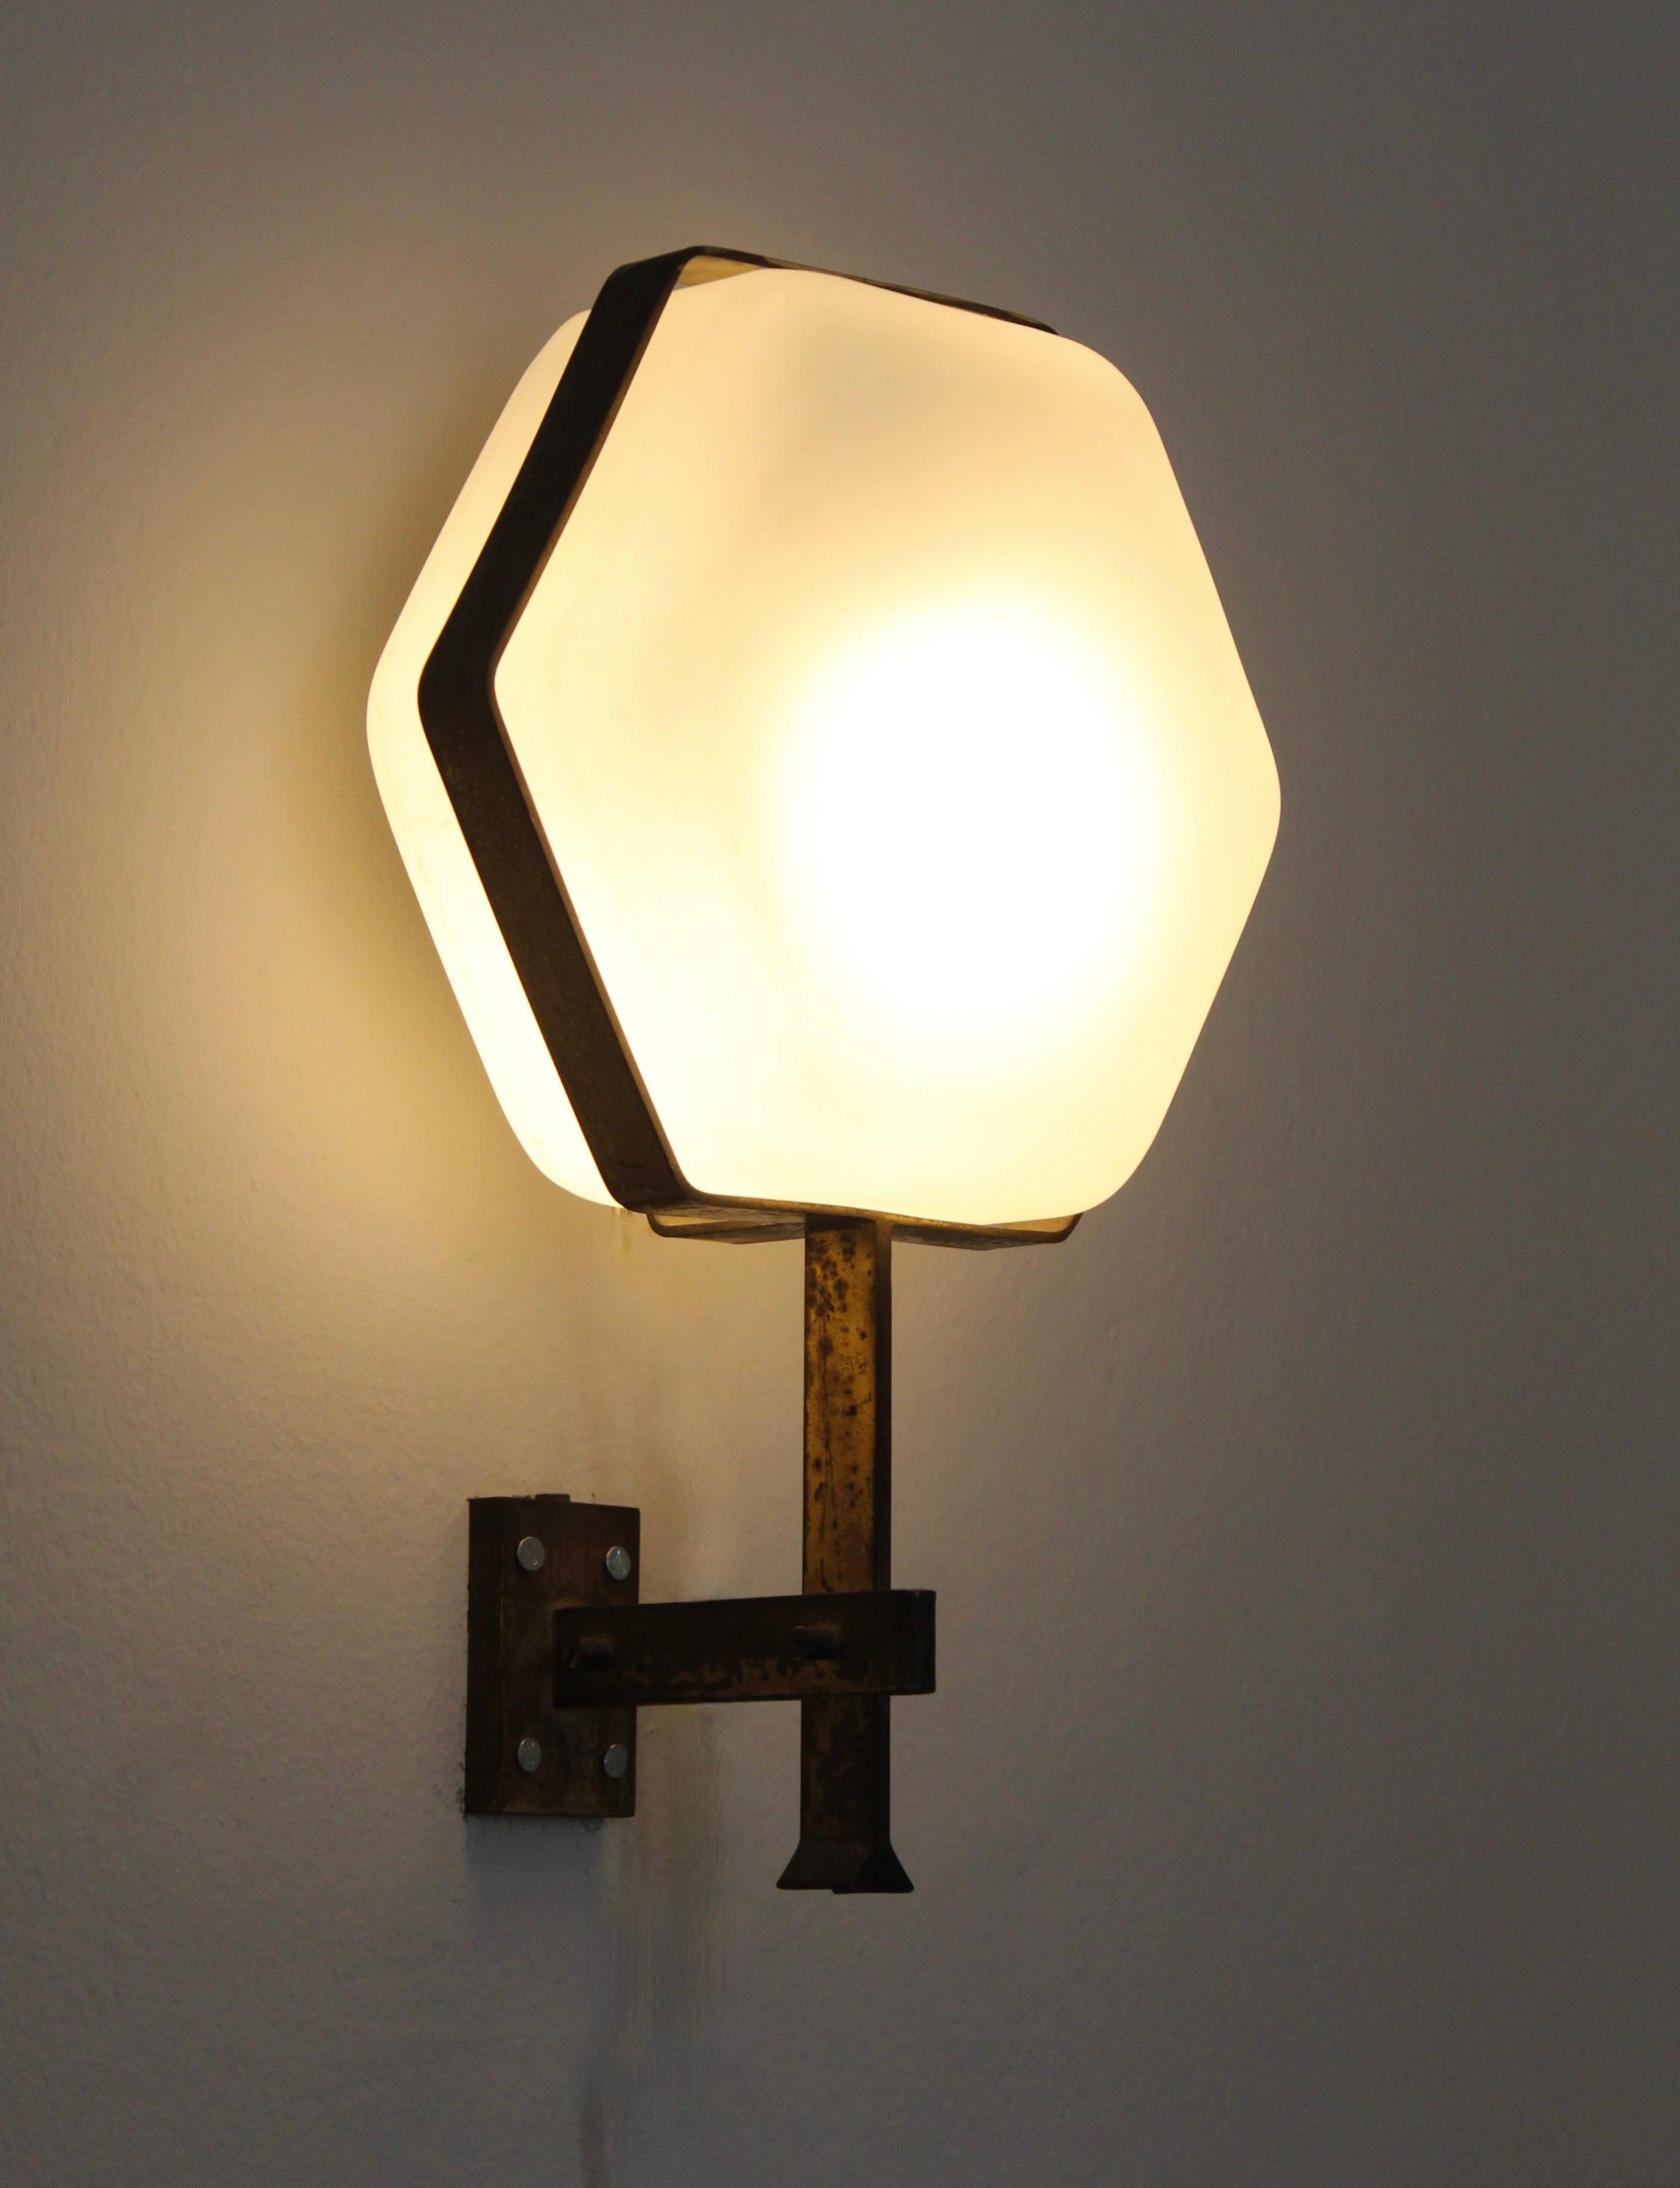 Mid-Century Modern Greco Illuminazione, Sconce / Wall Light, Brass, Glass, Italy, 1950s For Sale